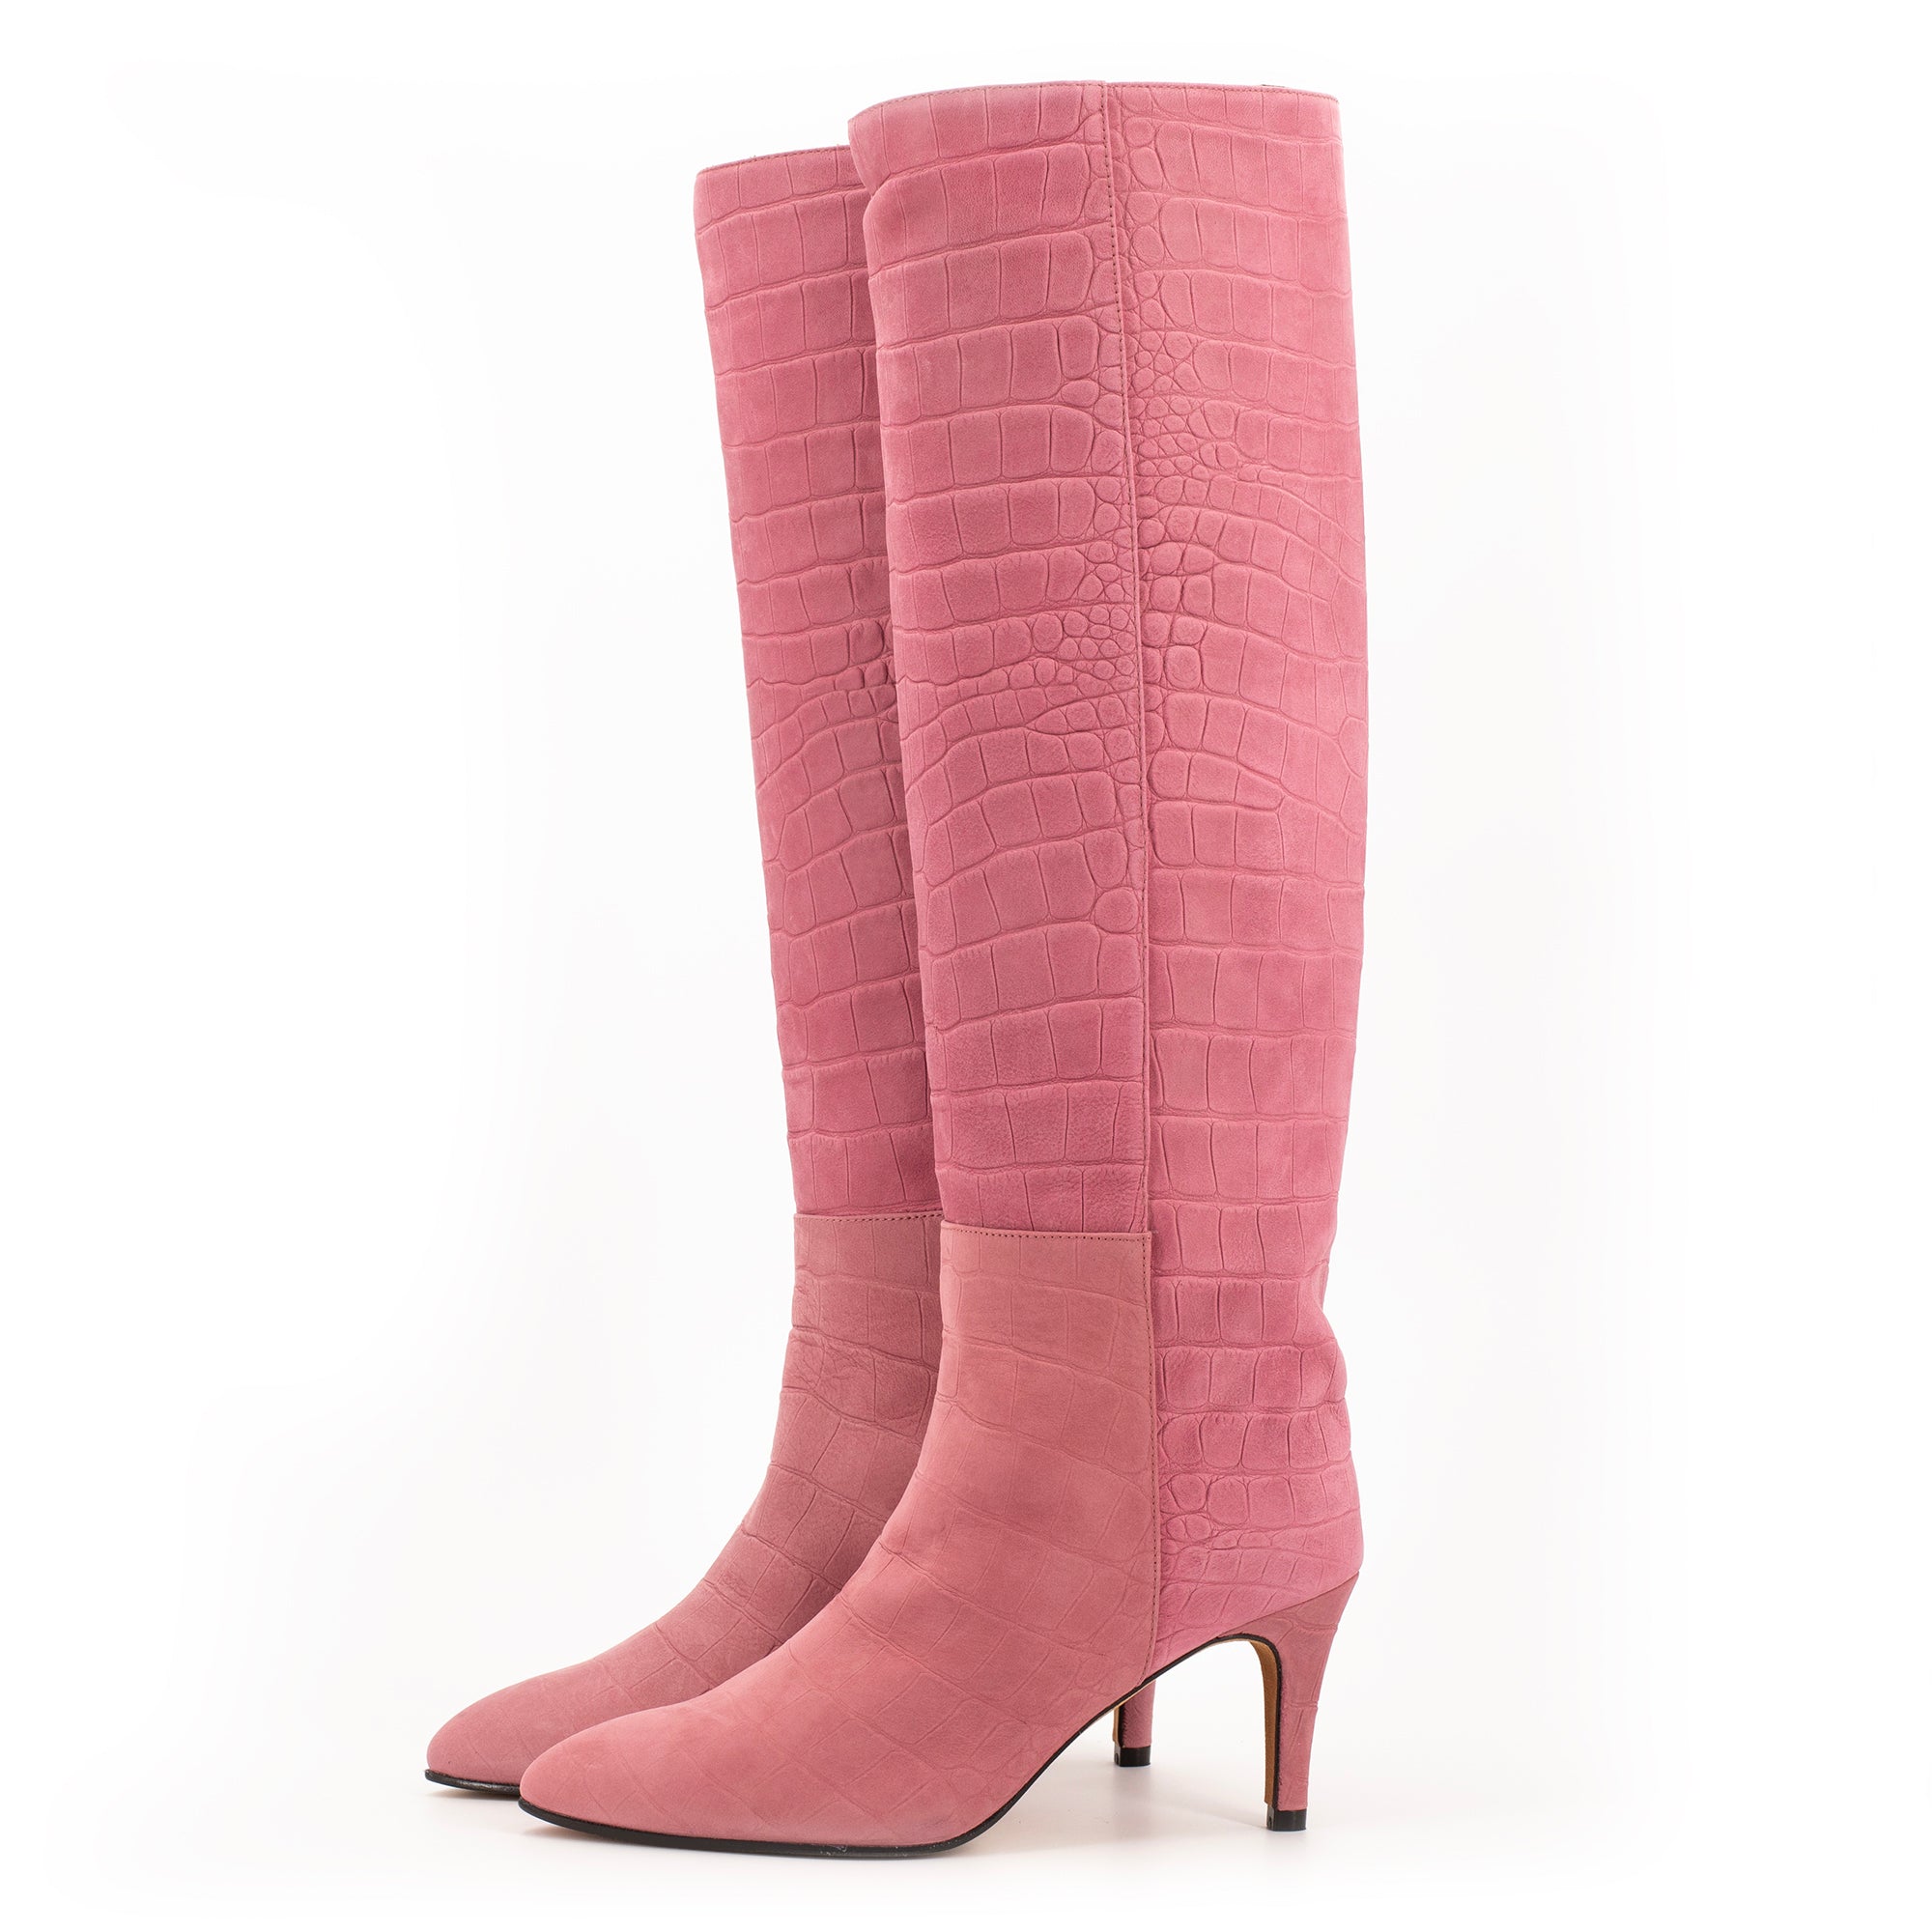 ROMA PINK TALL BOOTS